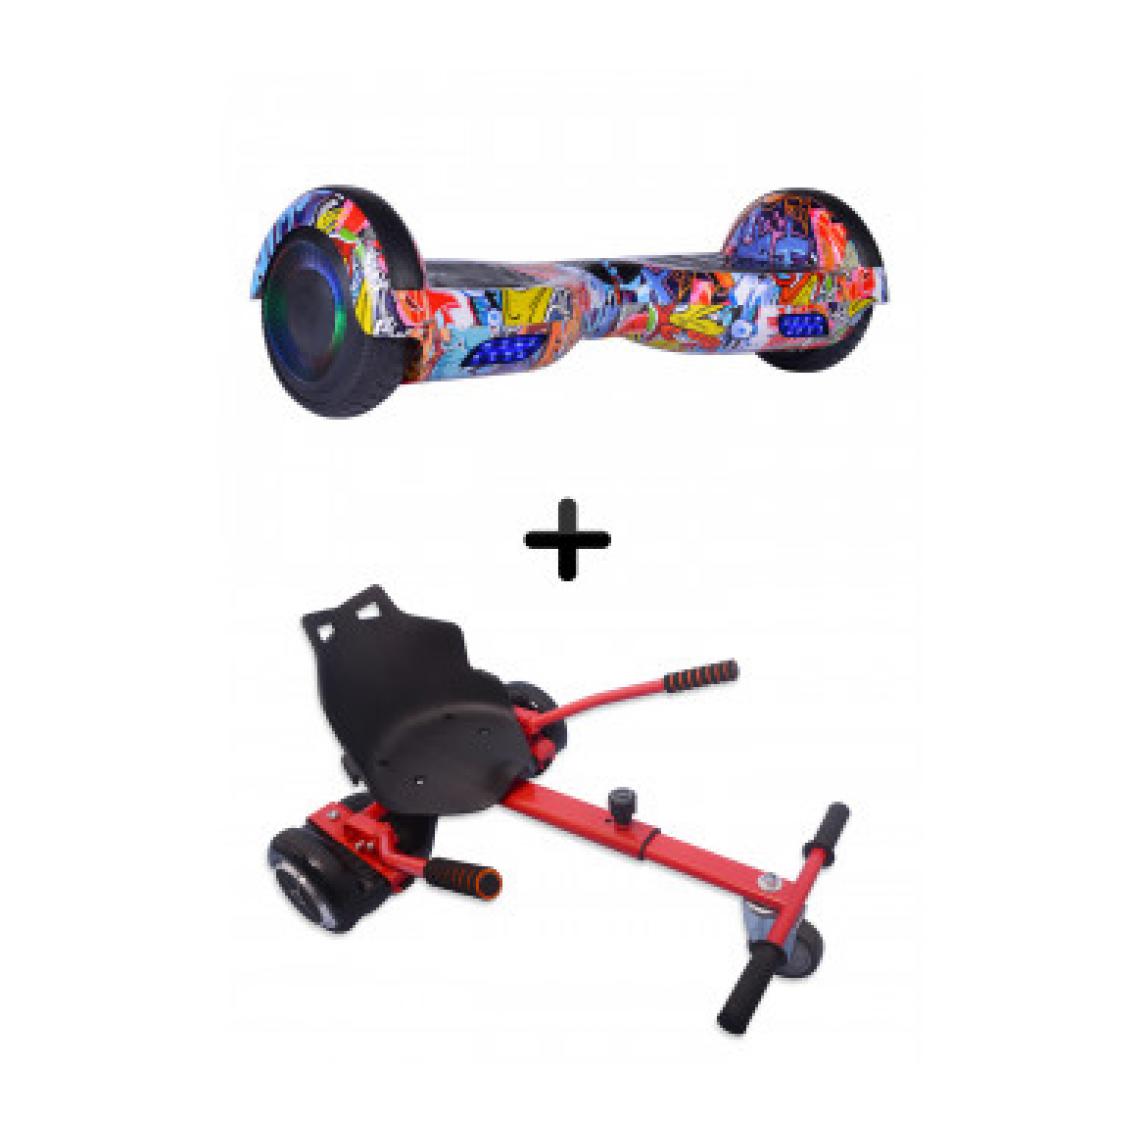 Hoverdrive - Hoverboard Prime 6.5'' V2 500W Roues Lumineuses Led Edition Street Art + Kart Rouge - Gyropode